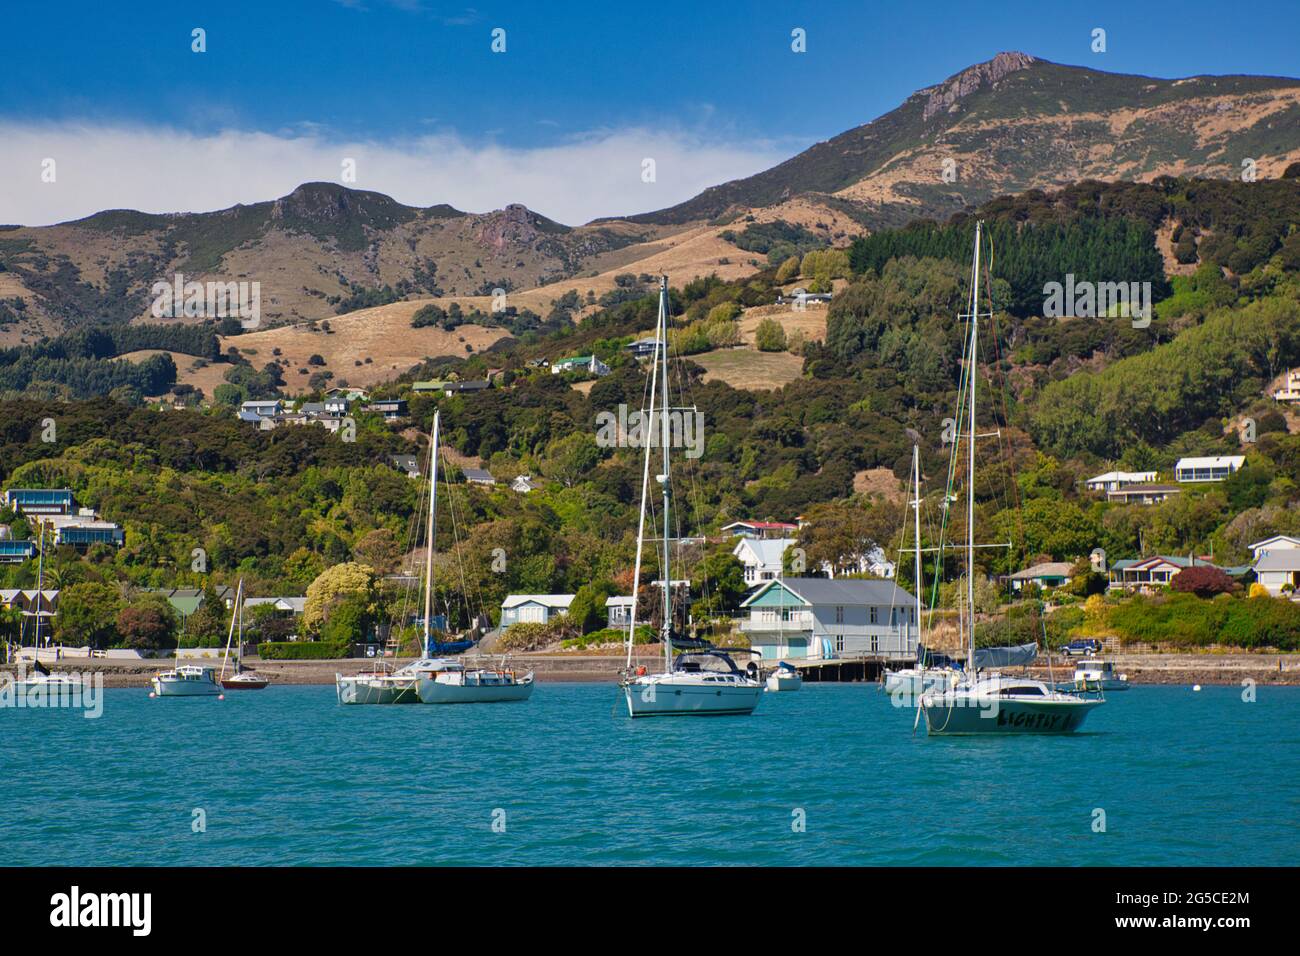 Pretty setting of hills, houses, small boats and yachts on moorings, on the east coast of South Island, New Zealand Stock Photo